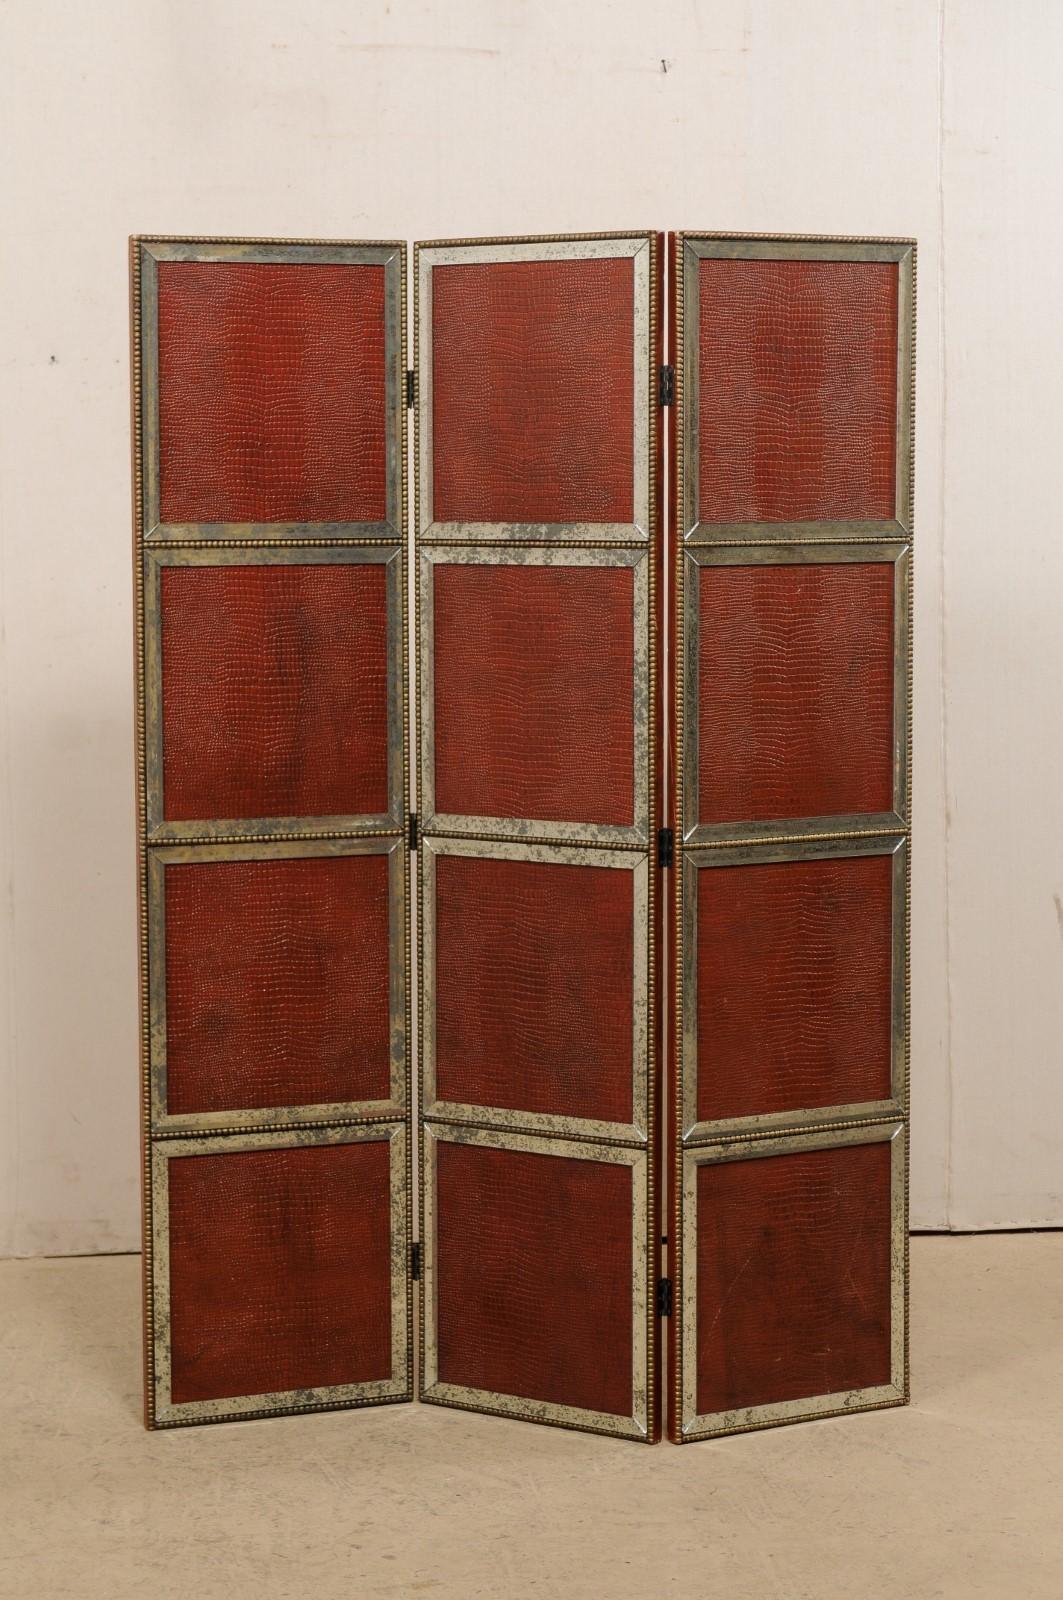 A French leather and mirrored glass folding accent screen or room divider. This vintage accordion style folding screen from France features three long sections, connected with hinges, each section comprised of four panels in a burnished red-toned